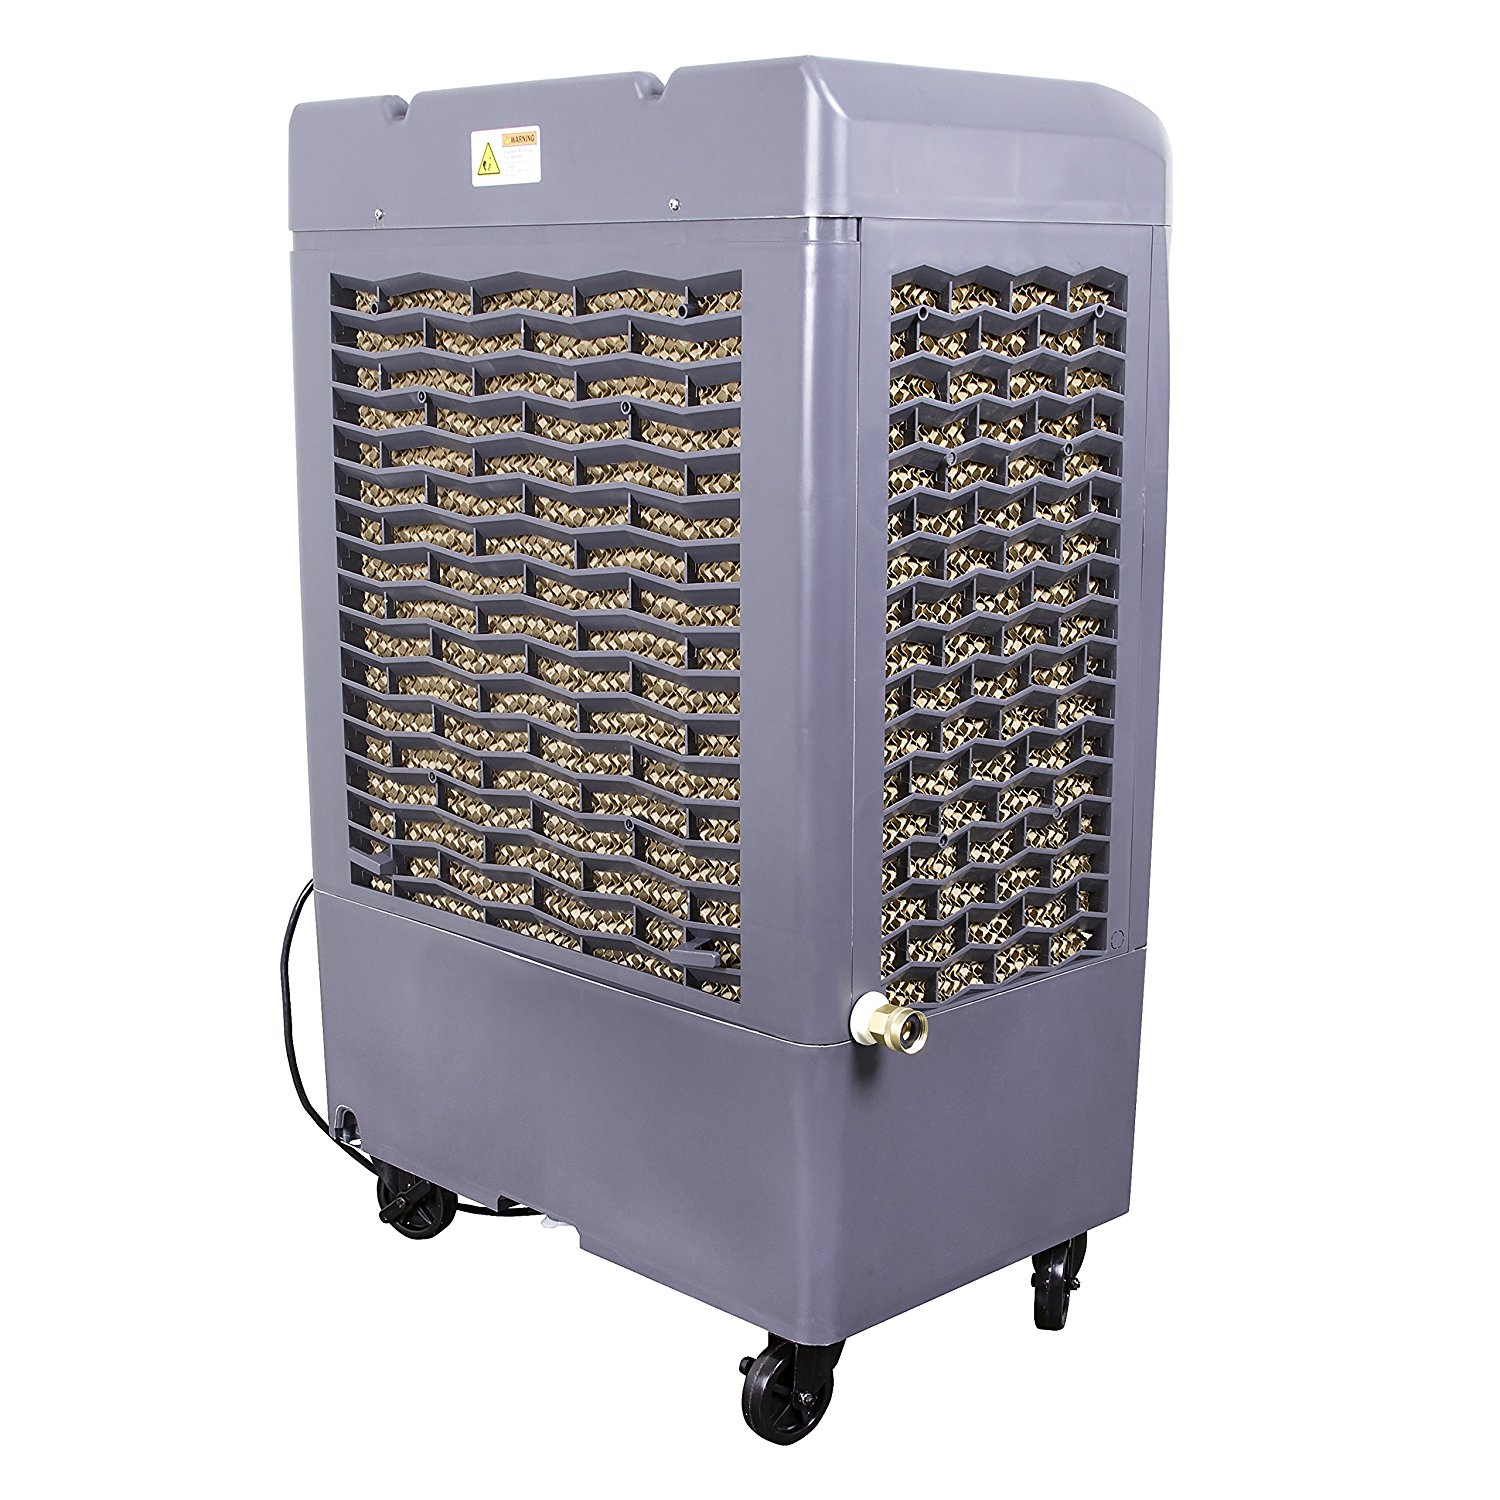 Hessaire Mc37a 2200 Cfm 3 Speed Evaporative Cooler N2 Free Image Download 8368